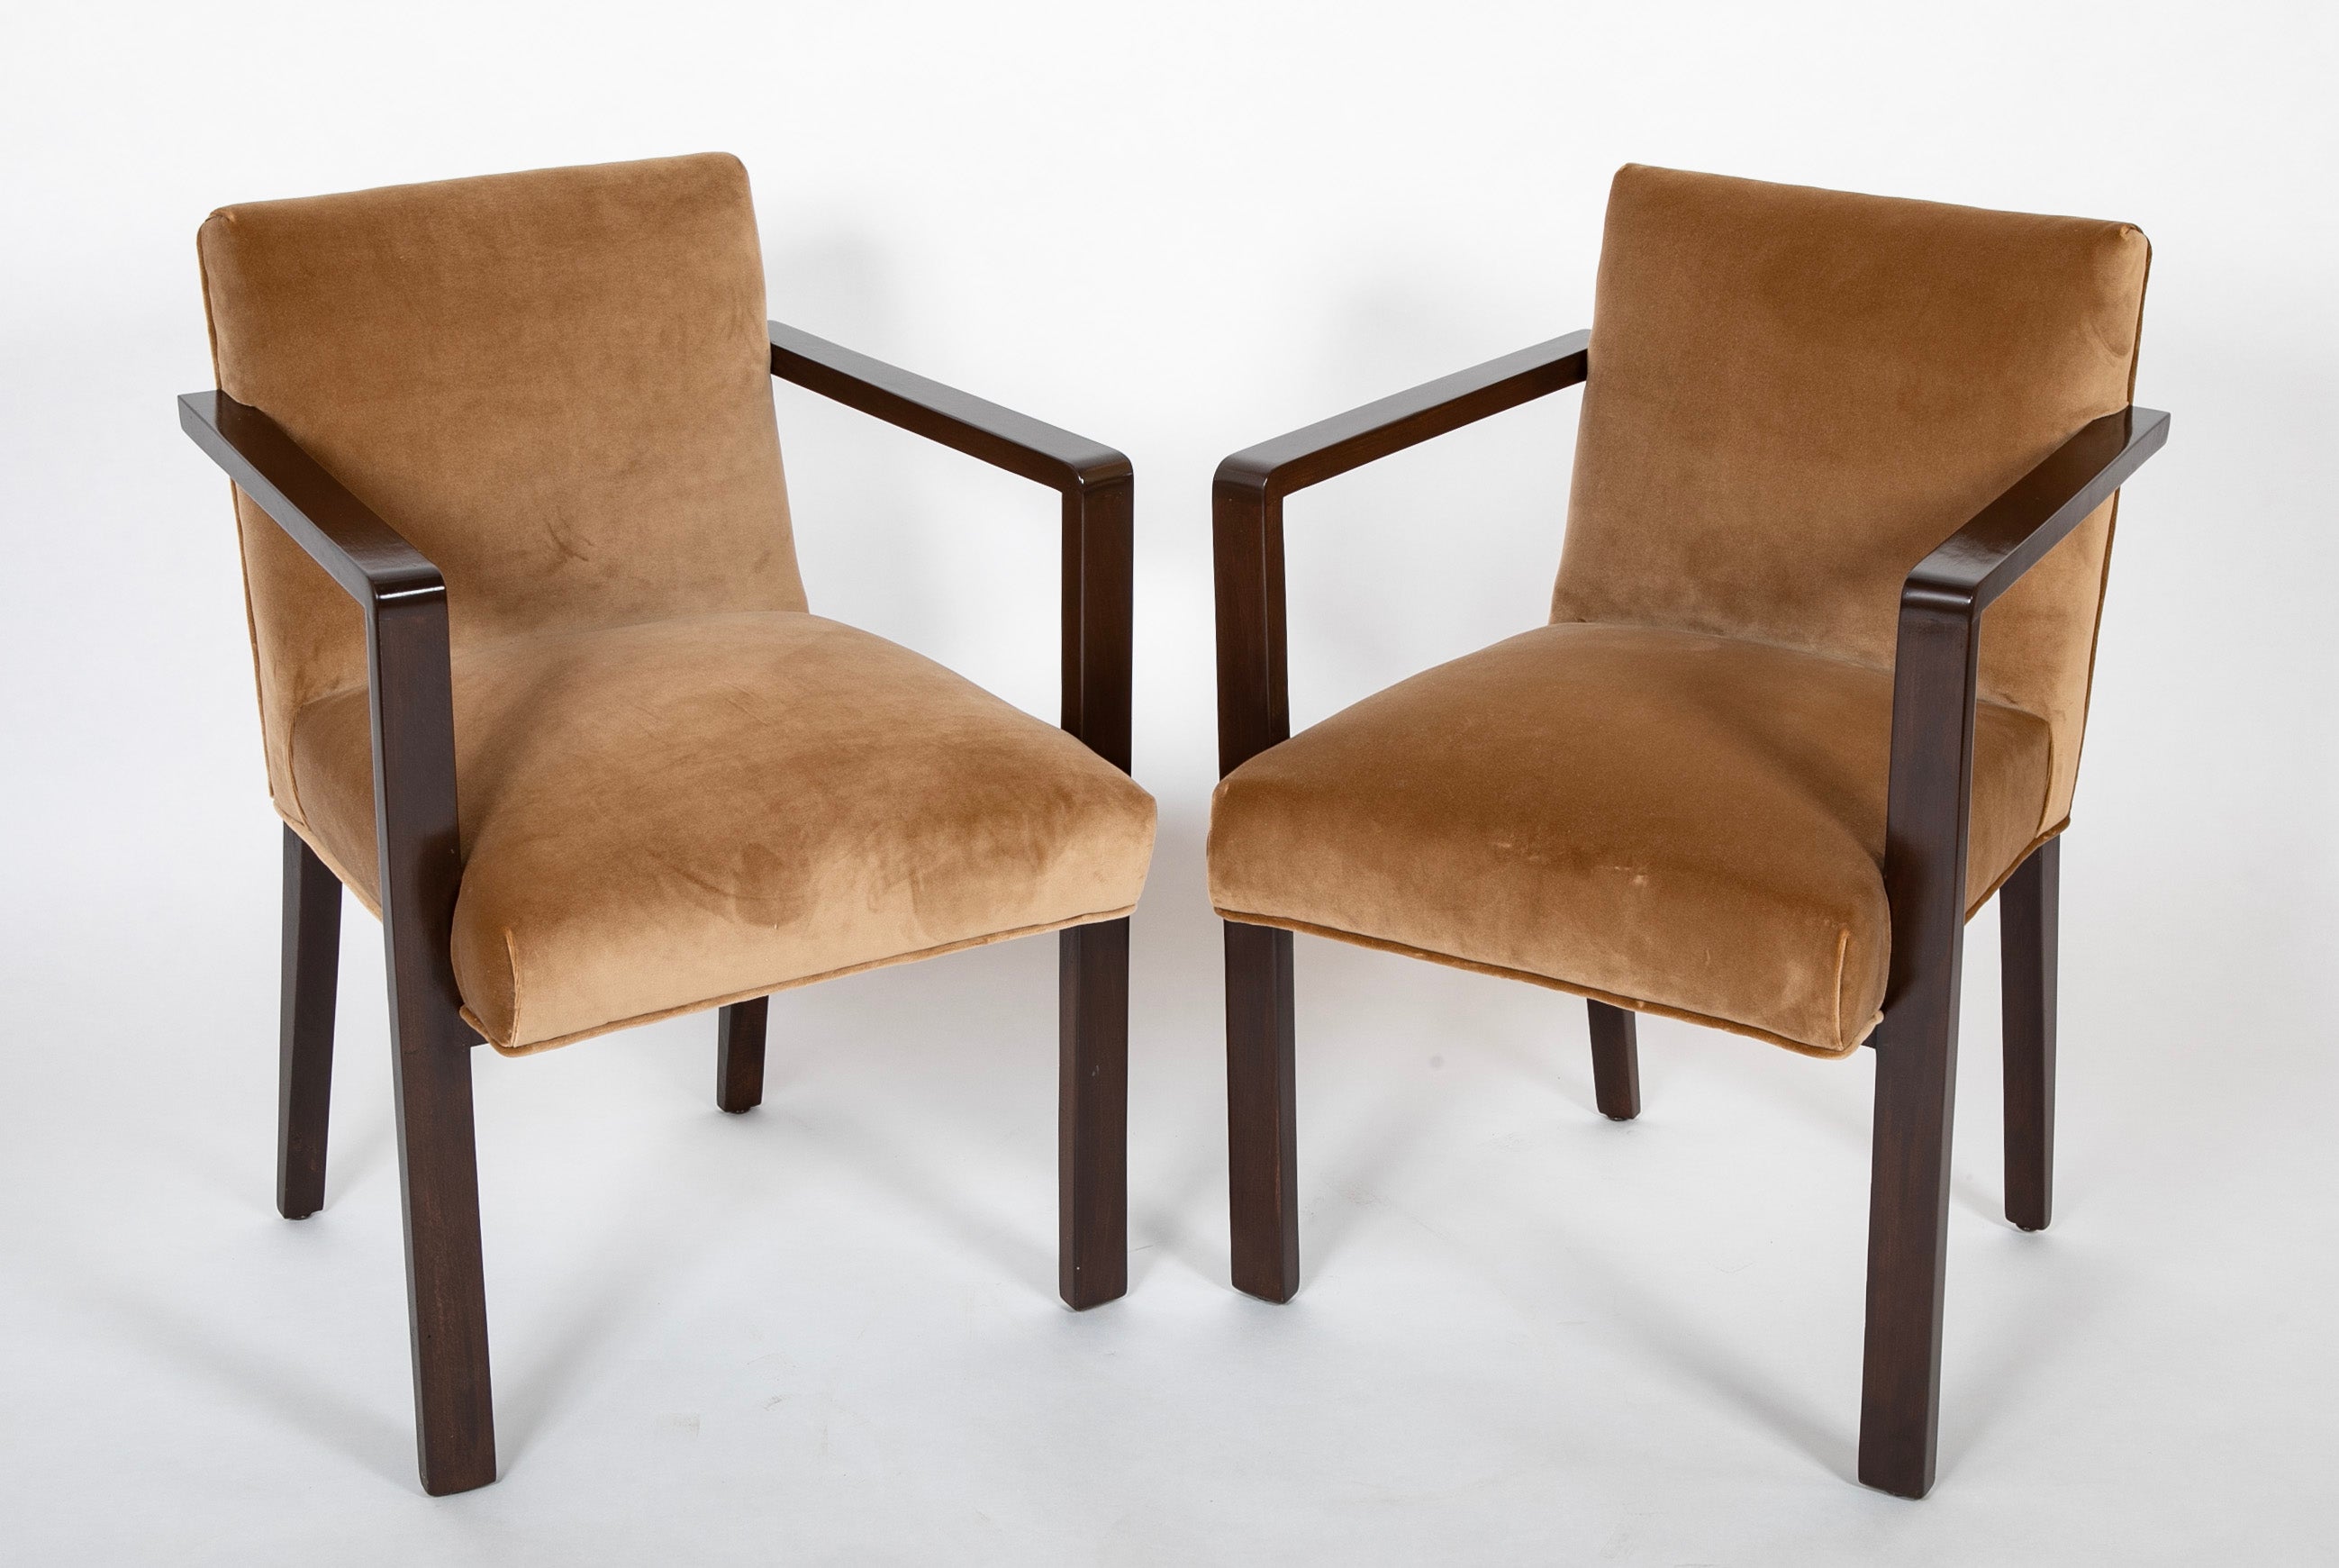 A Pair of 1940's French Armchairs in Tan Velvet